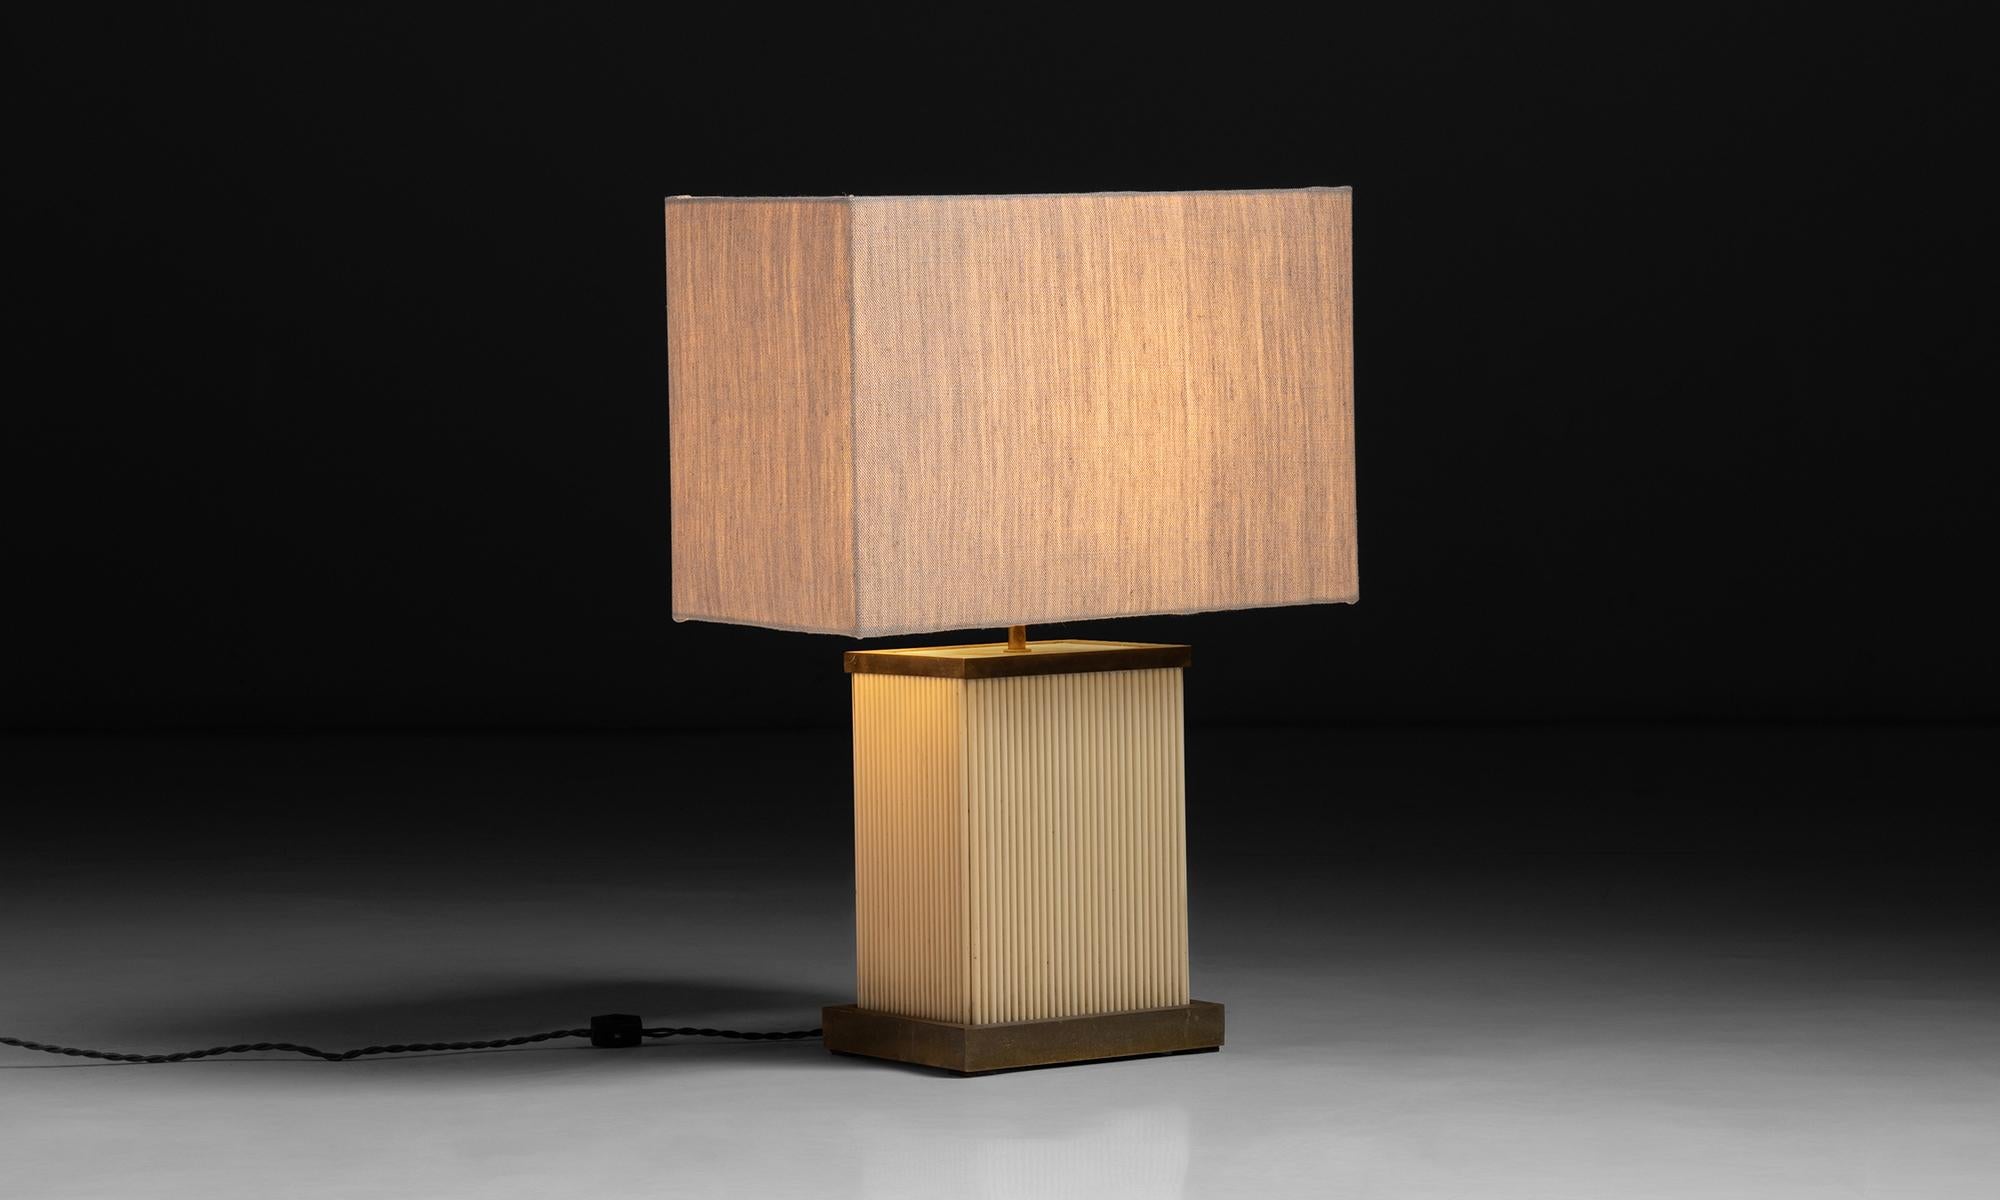 Table lamp by Tomasso Barbi.

Italy circa 1980

Brass & plastic base with neutral shade.

Measures: 17.25”L x 9.25”D x 24”H.